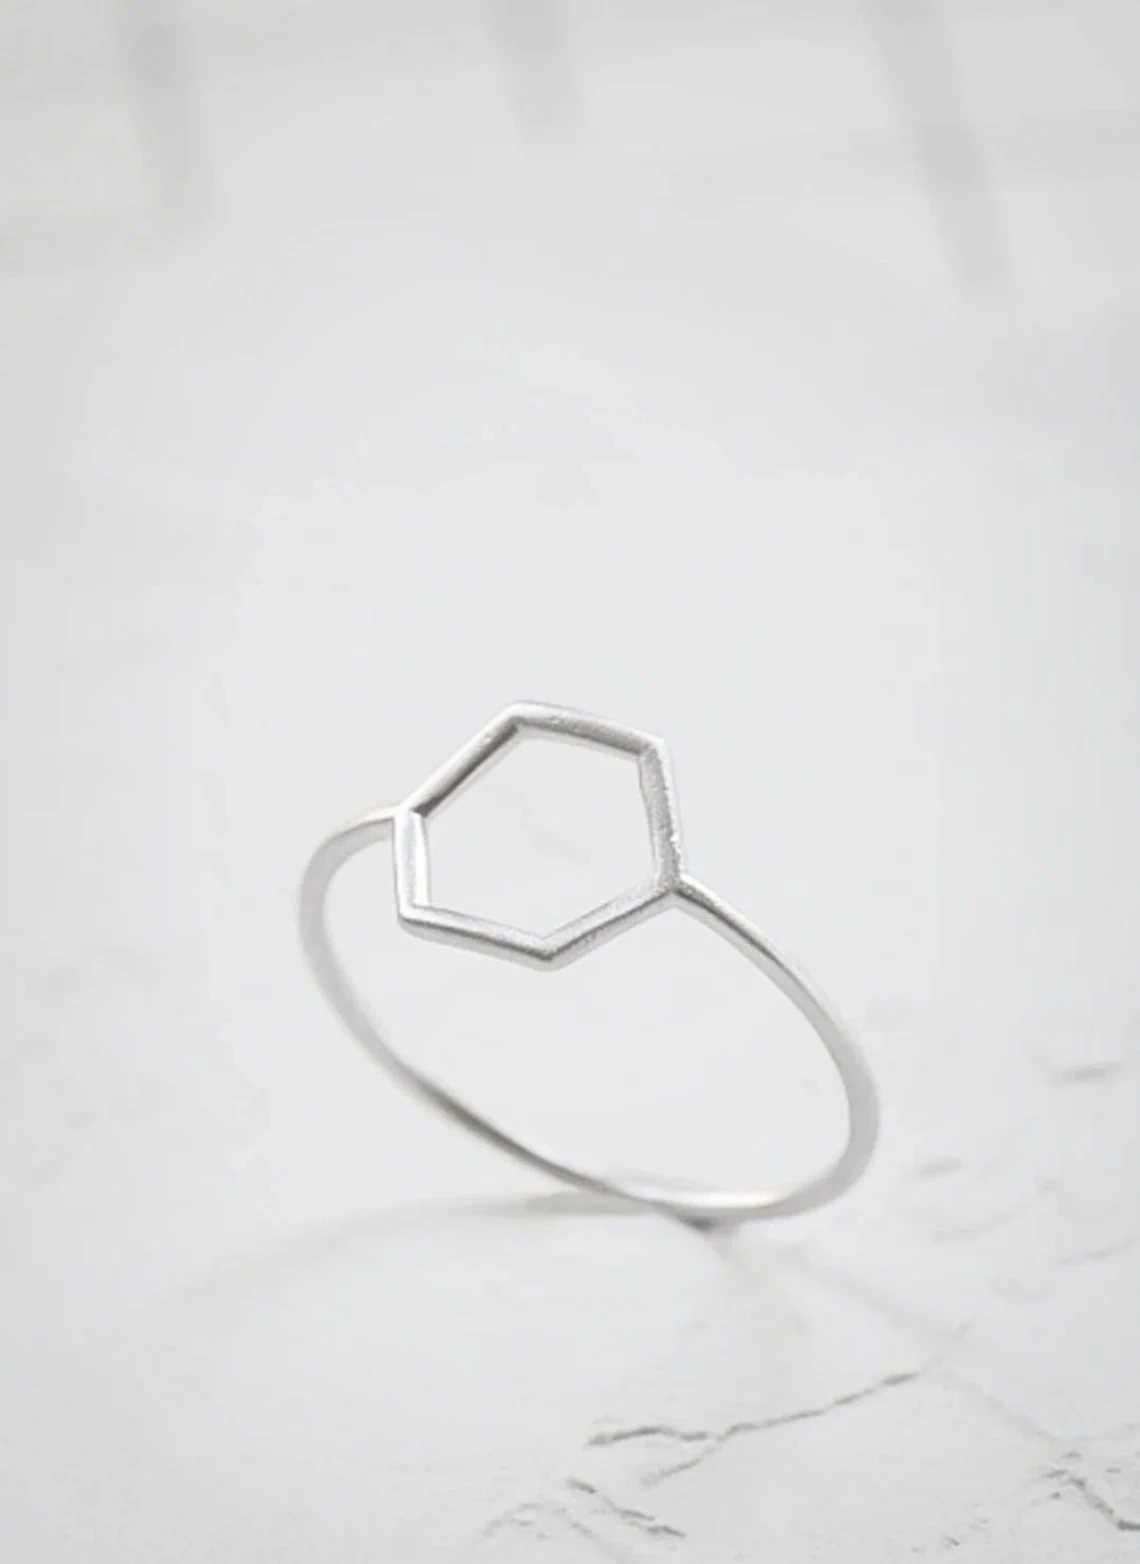 925 Sterling Silver Solid Hollow Open Hexagon Ring Handmade Delicate Dainty Stacking Geometric Contemporary Ring Simple Minimalist Jewelry-11402252